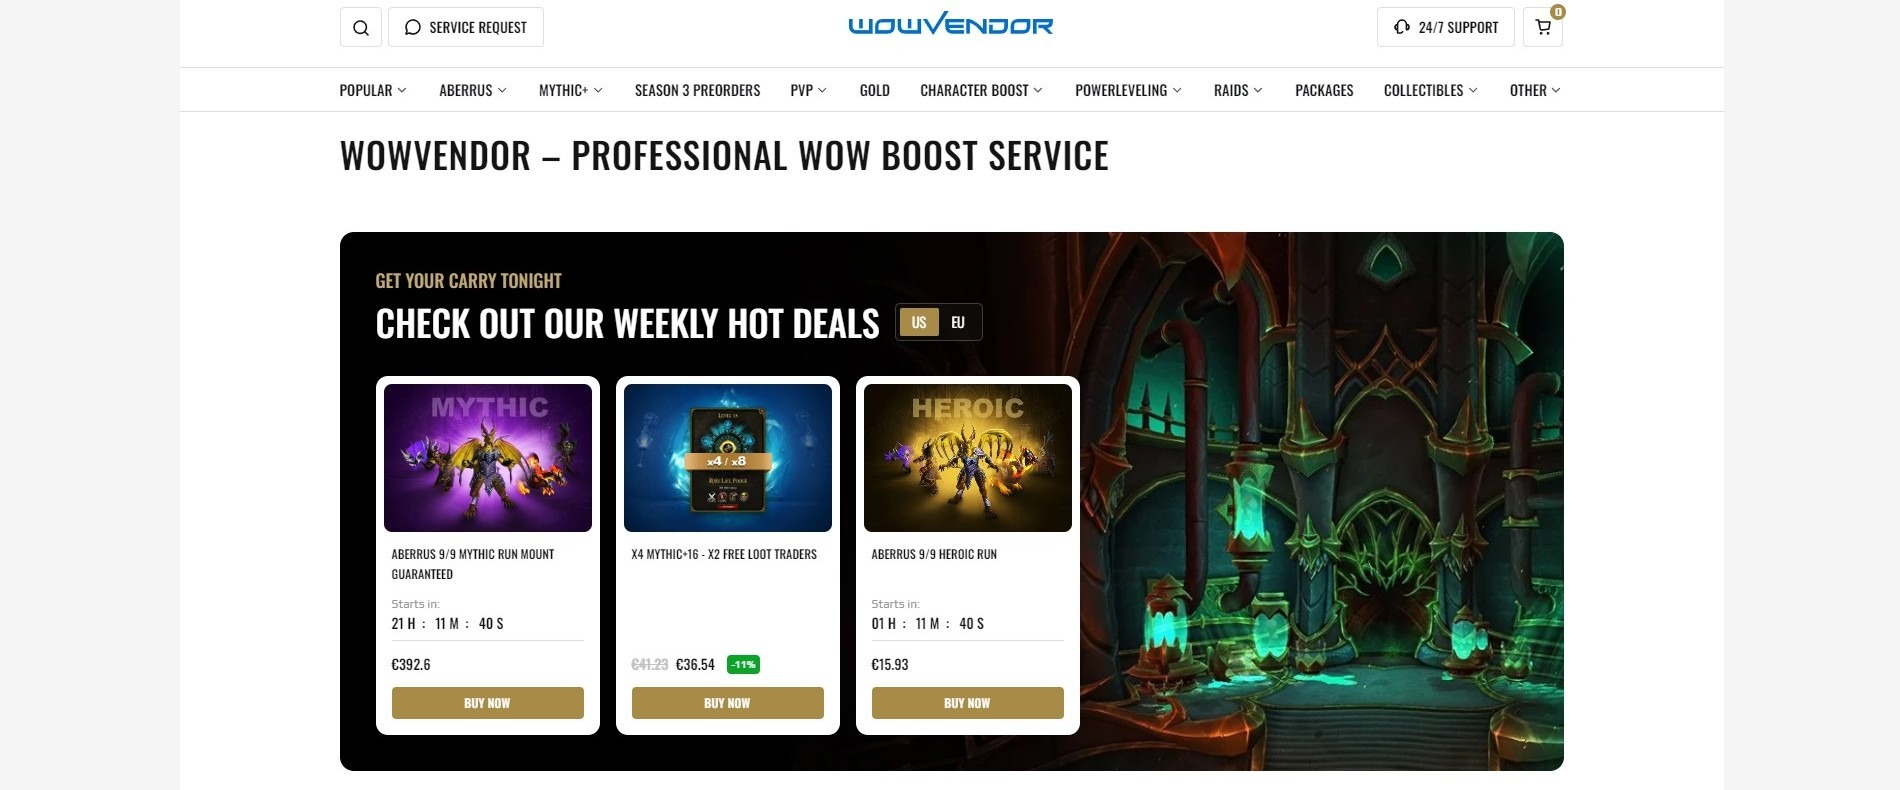 WowVendor, as the name suggests, is a website that accommodates players who need to purchase a boost for the game